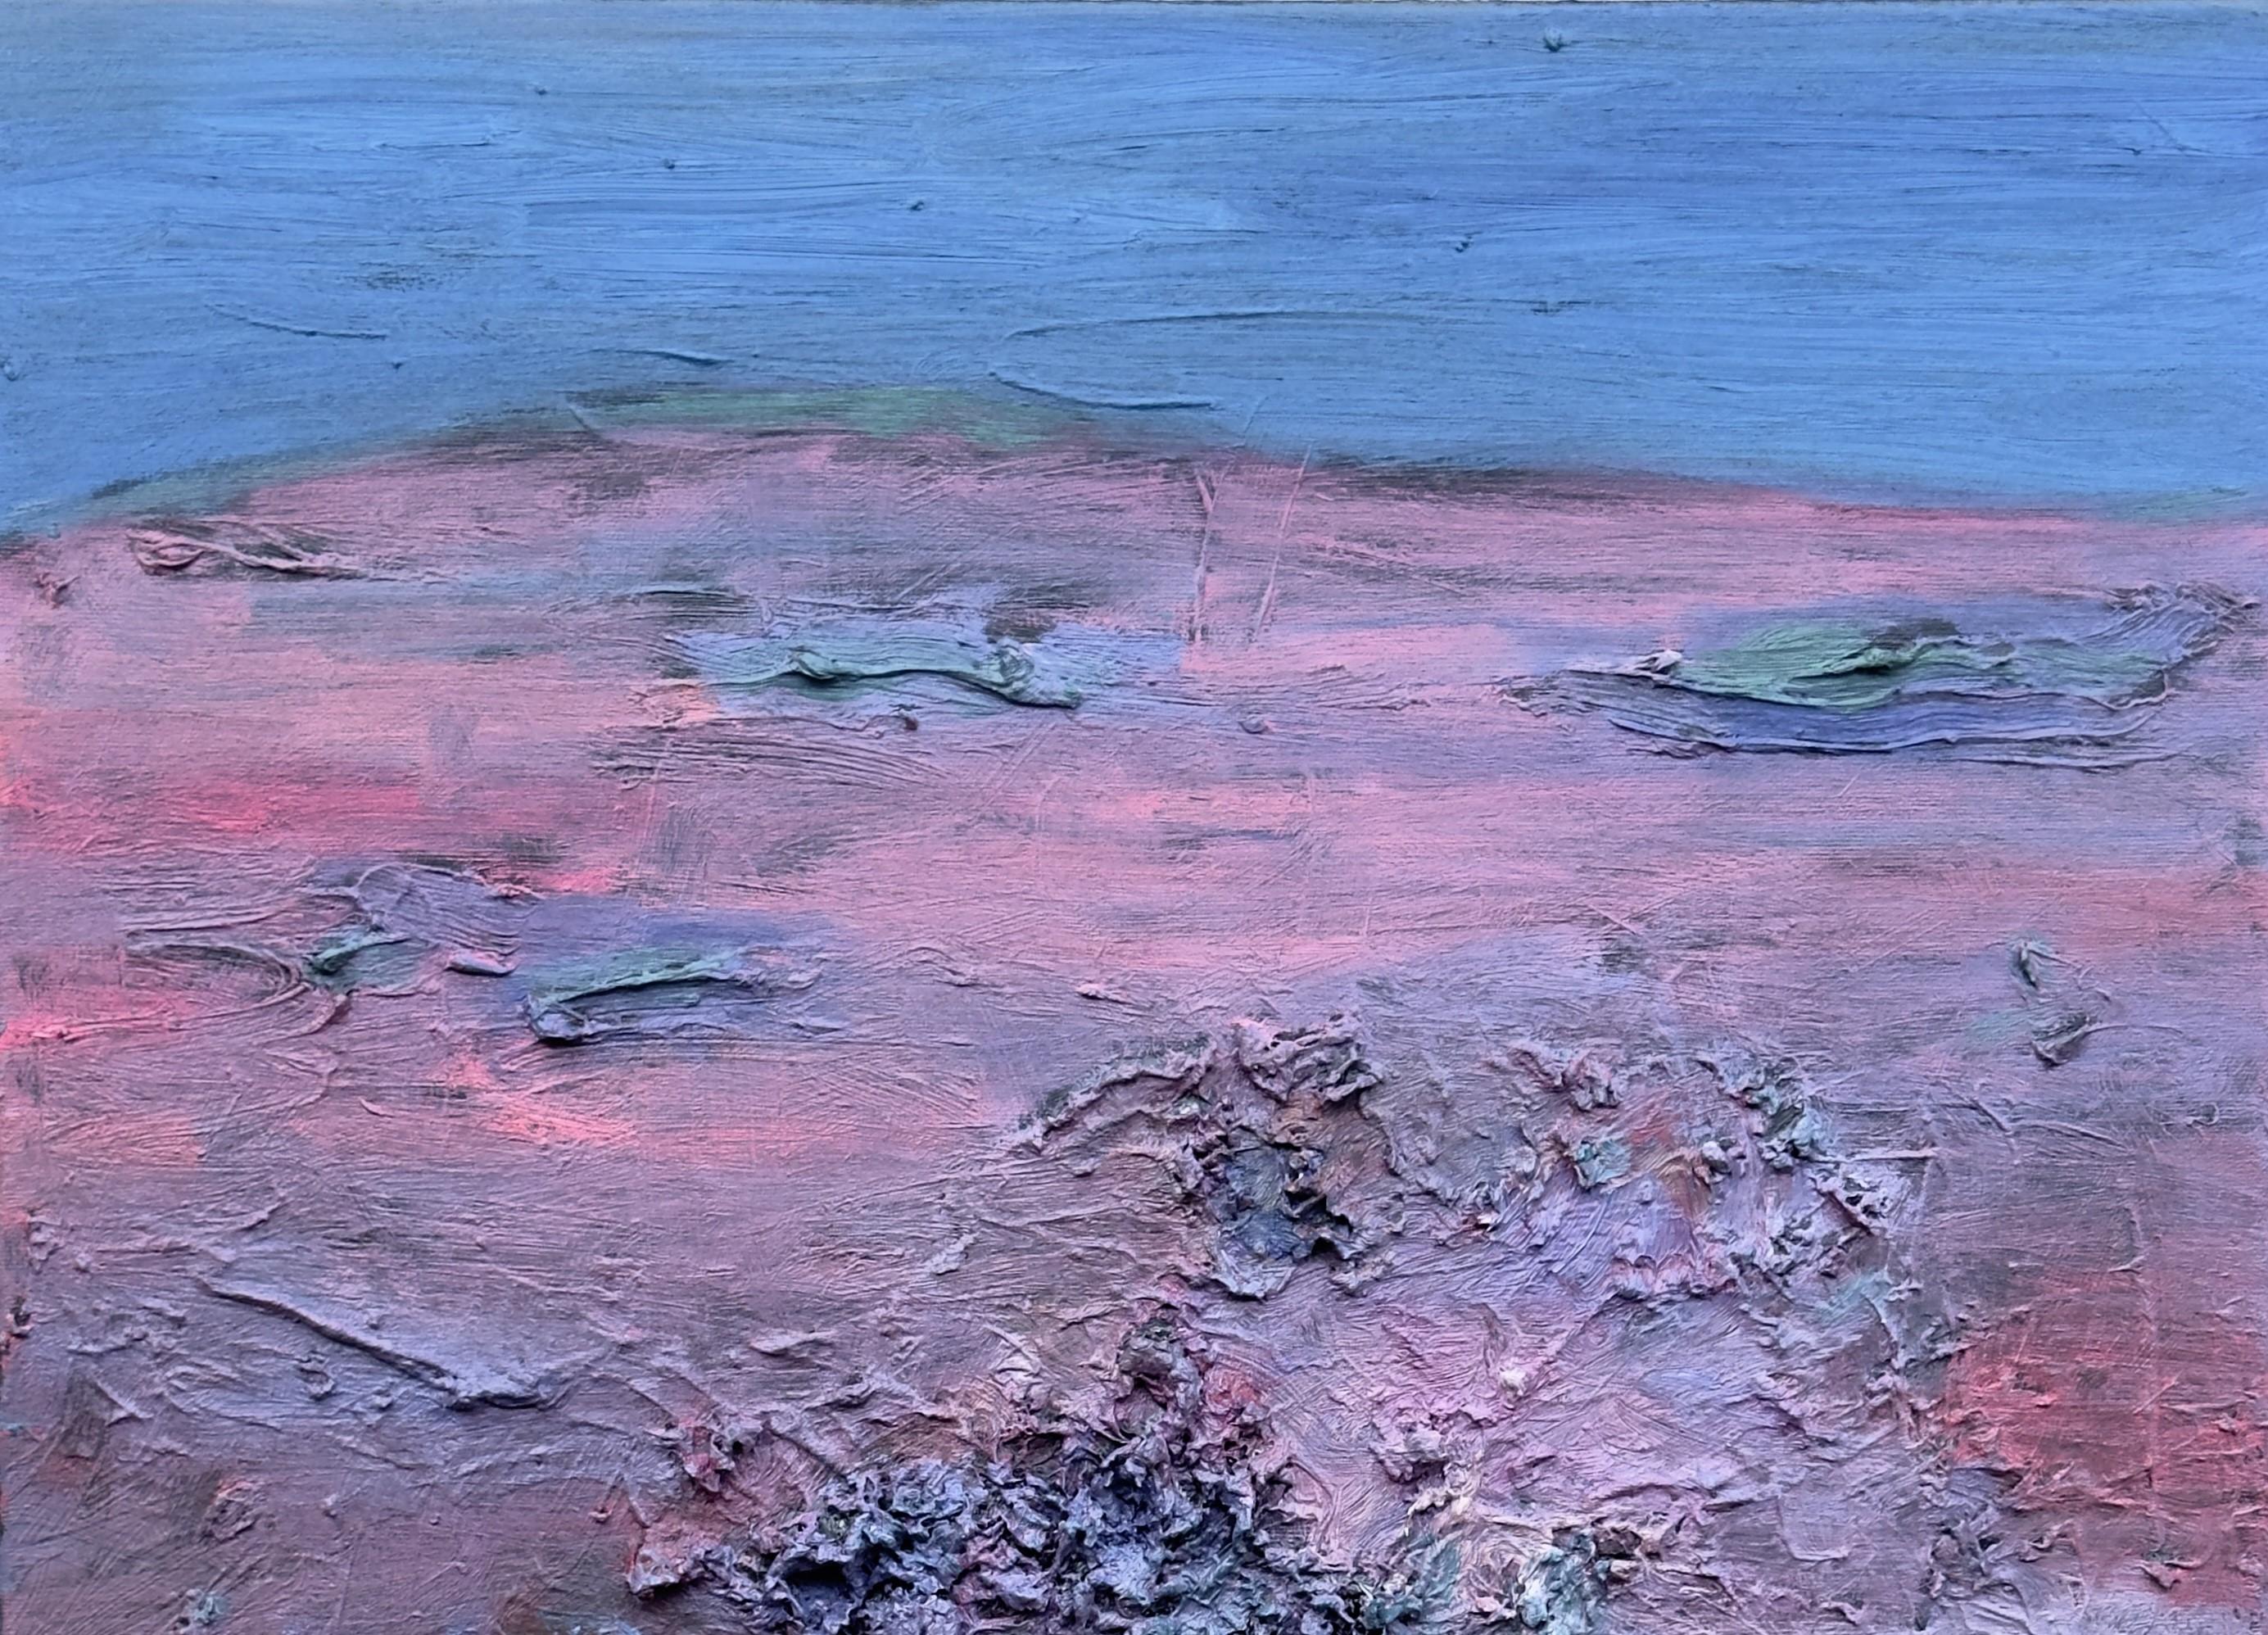 Body in the Field #1 - Abstract painting, landscape, blue, pink - Painting by Zsolt Berszán